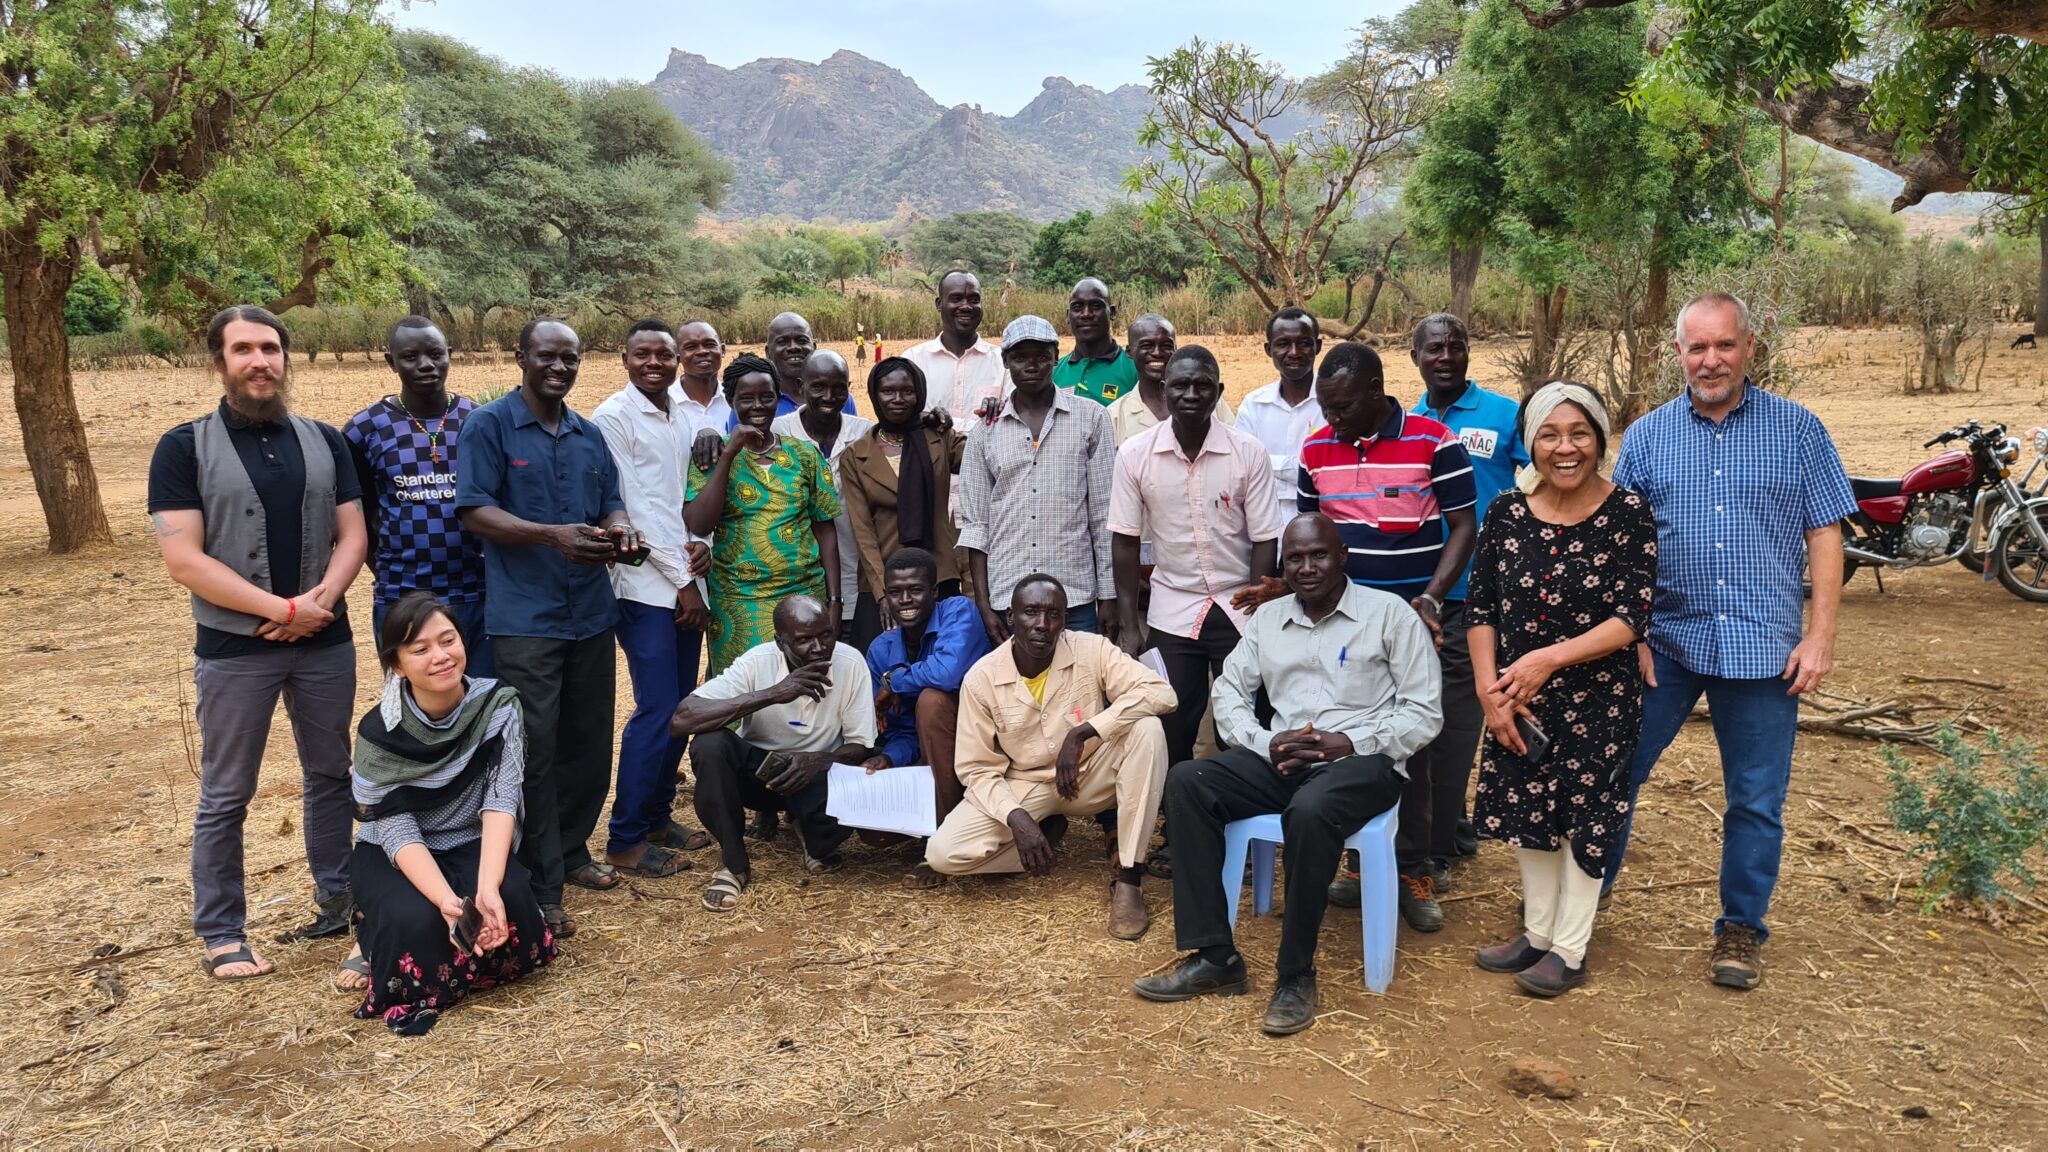 A group of people in Africa who are part of GACX members